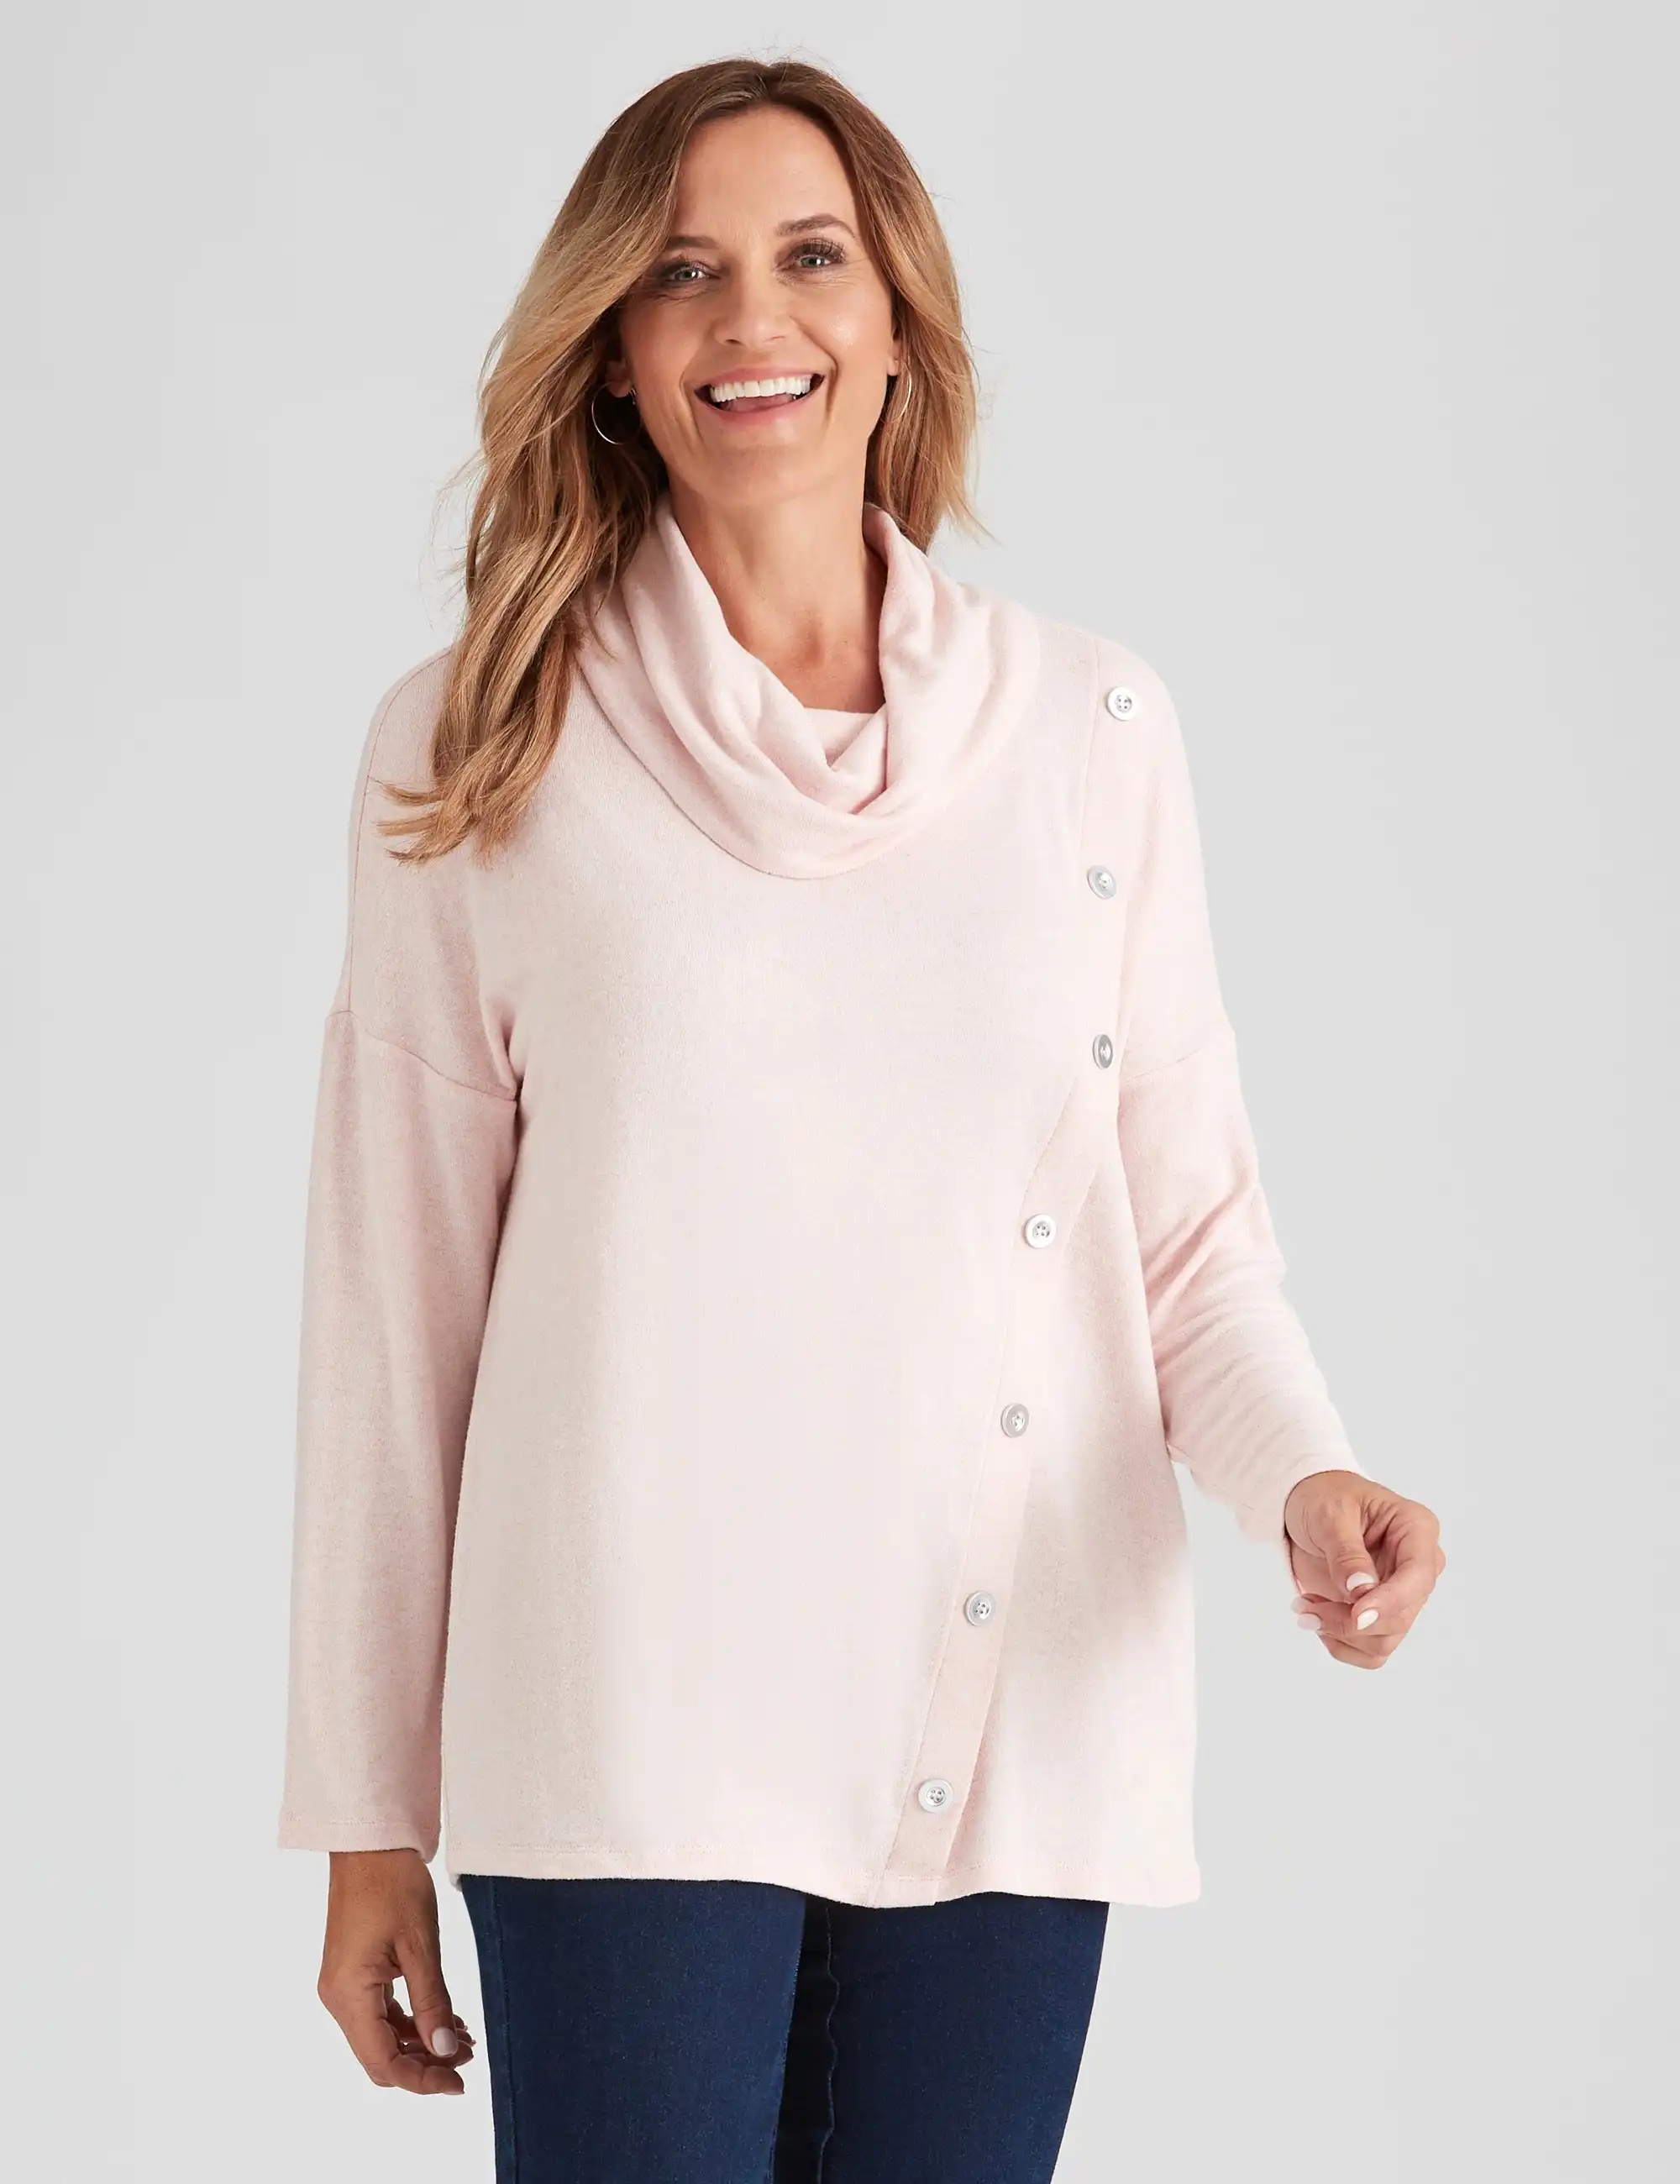 Millers Long Sleeve Brushed Cowl Neck with Button Detail Top